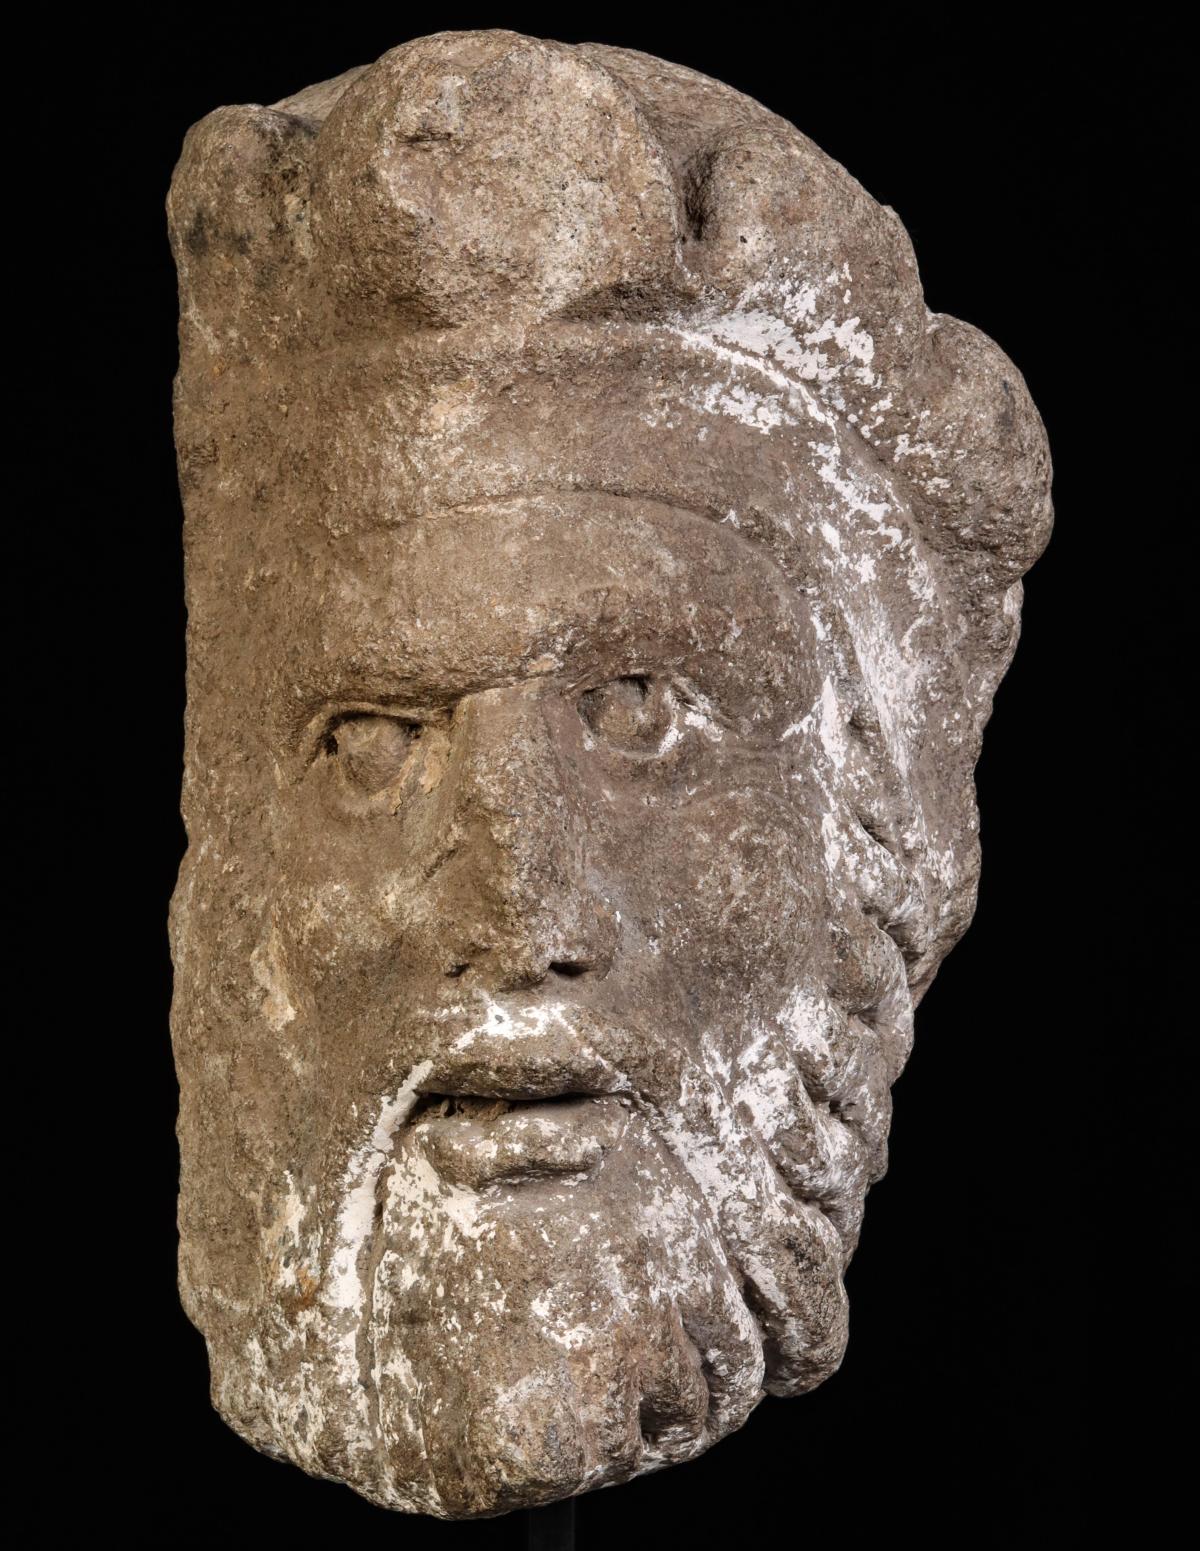 A LARGE CARVED OR CAST STONE HEAD FRAGMENT